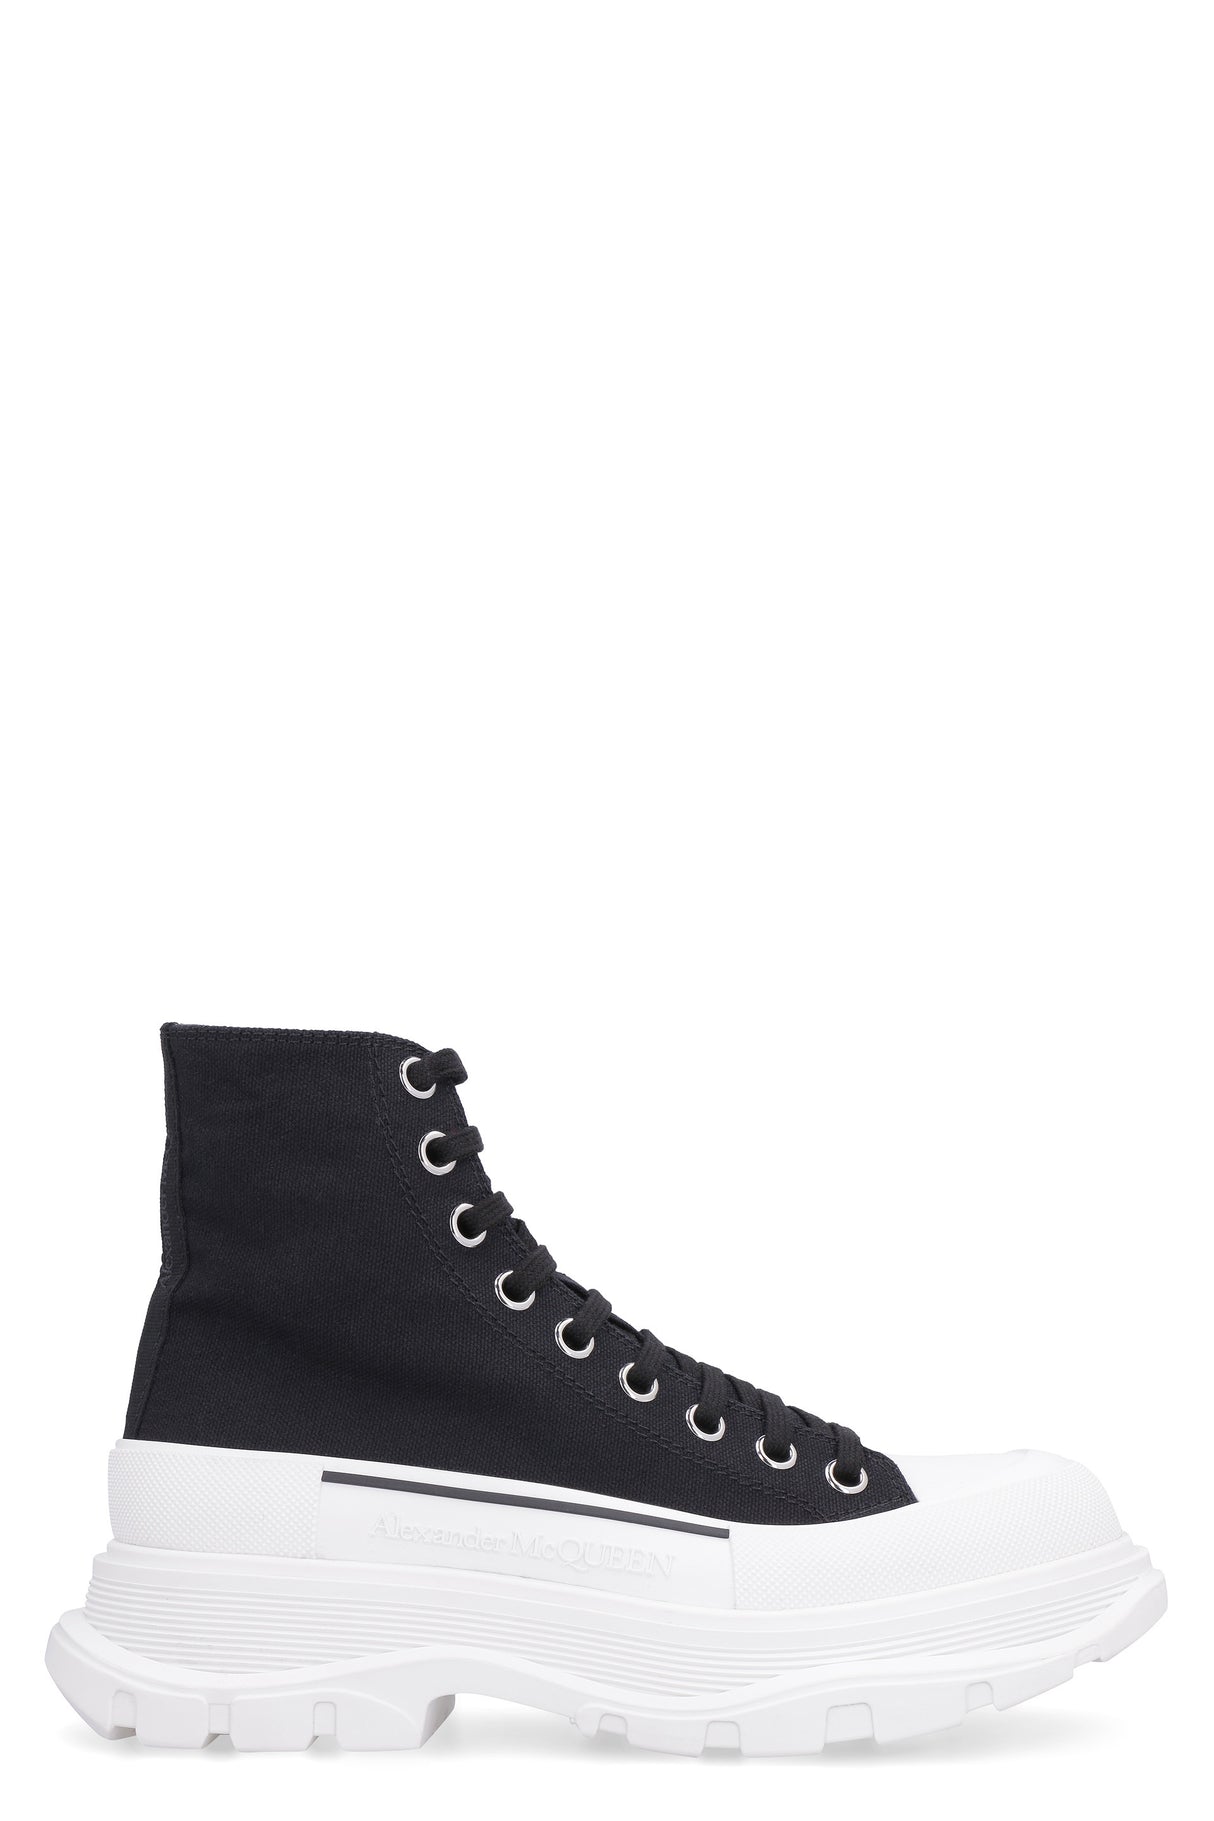 ALEXANDER MCQUEEN Men's Black Chunky Sole Ankle Boots